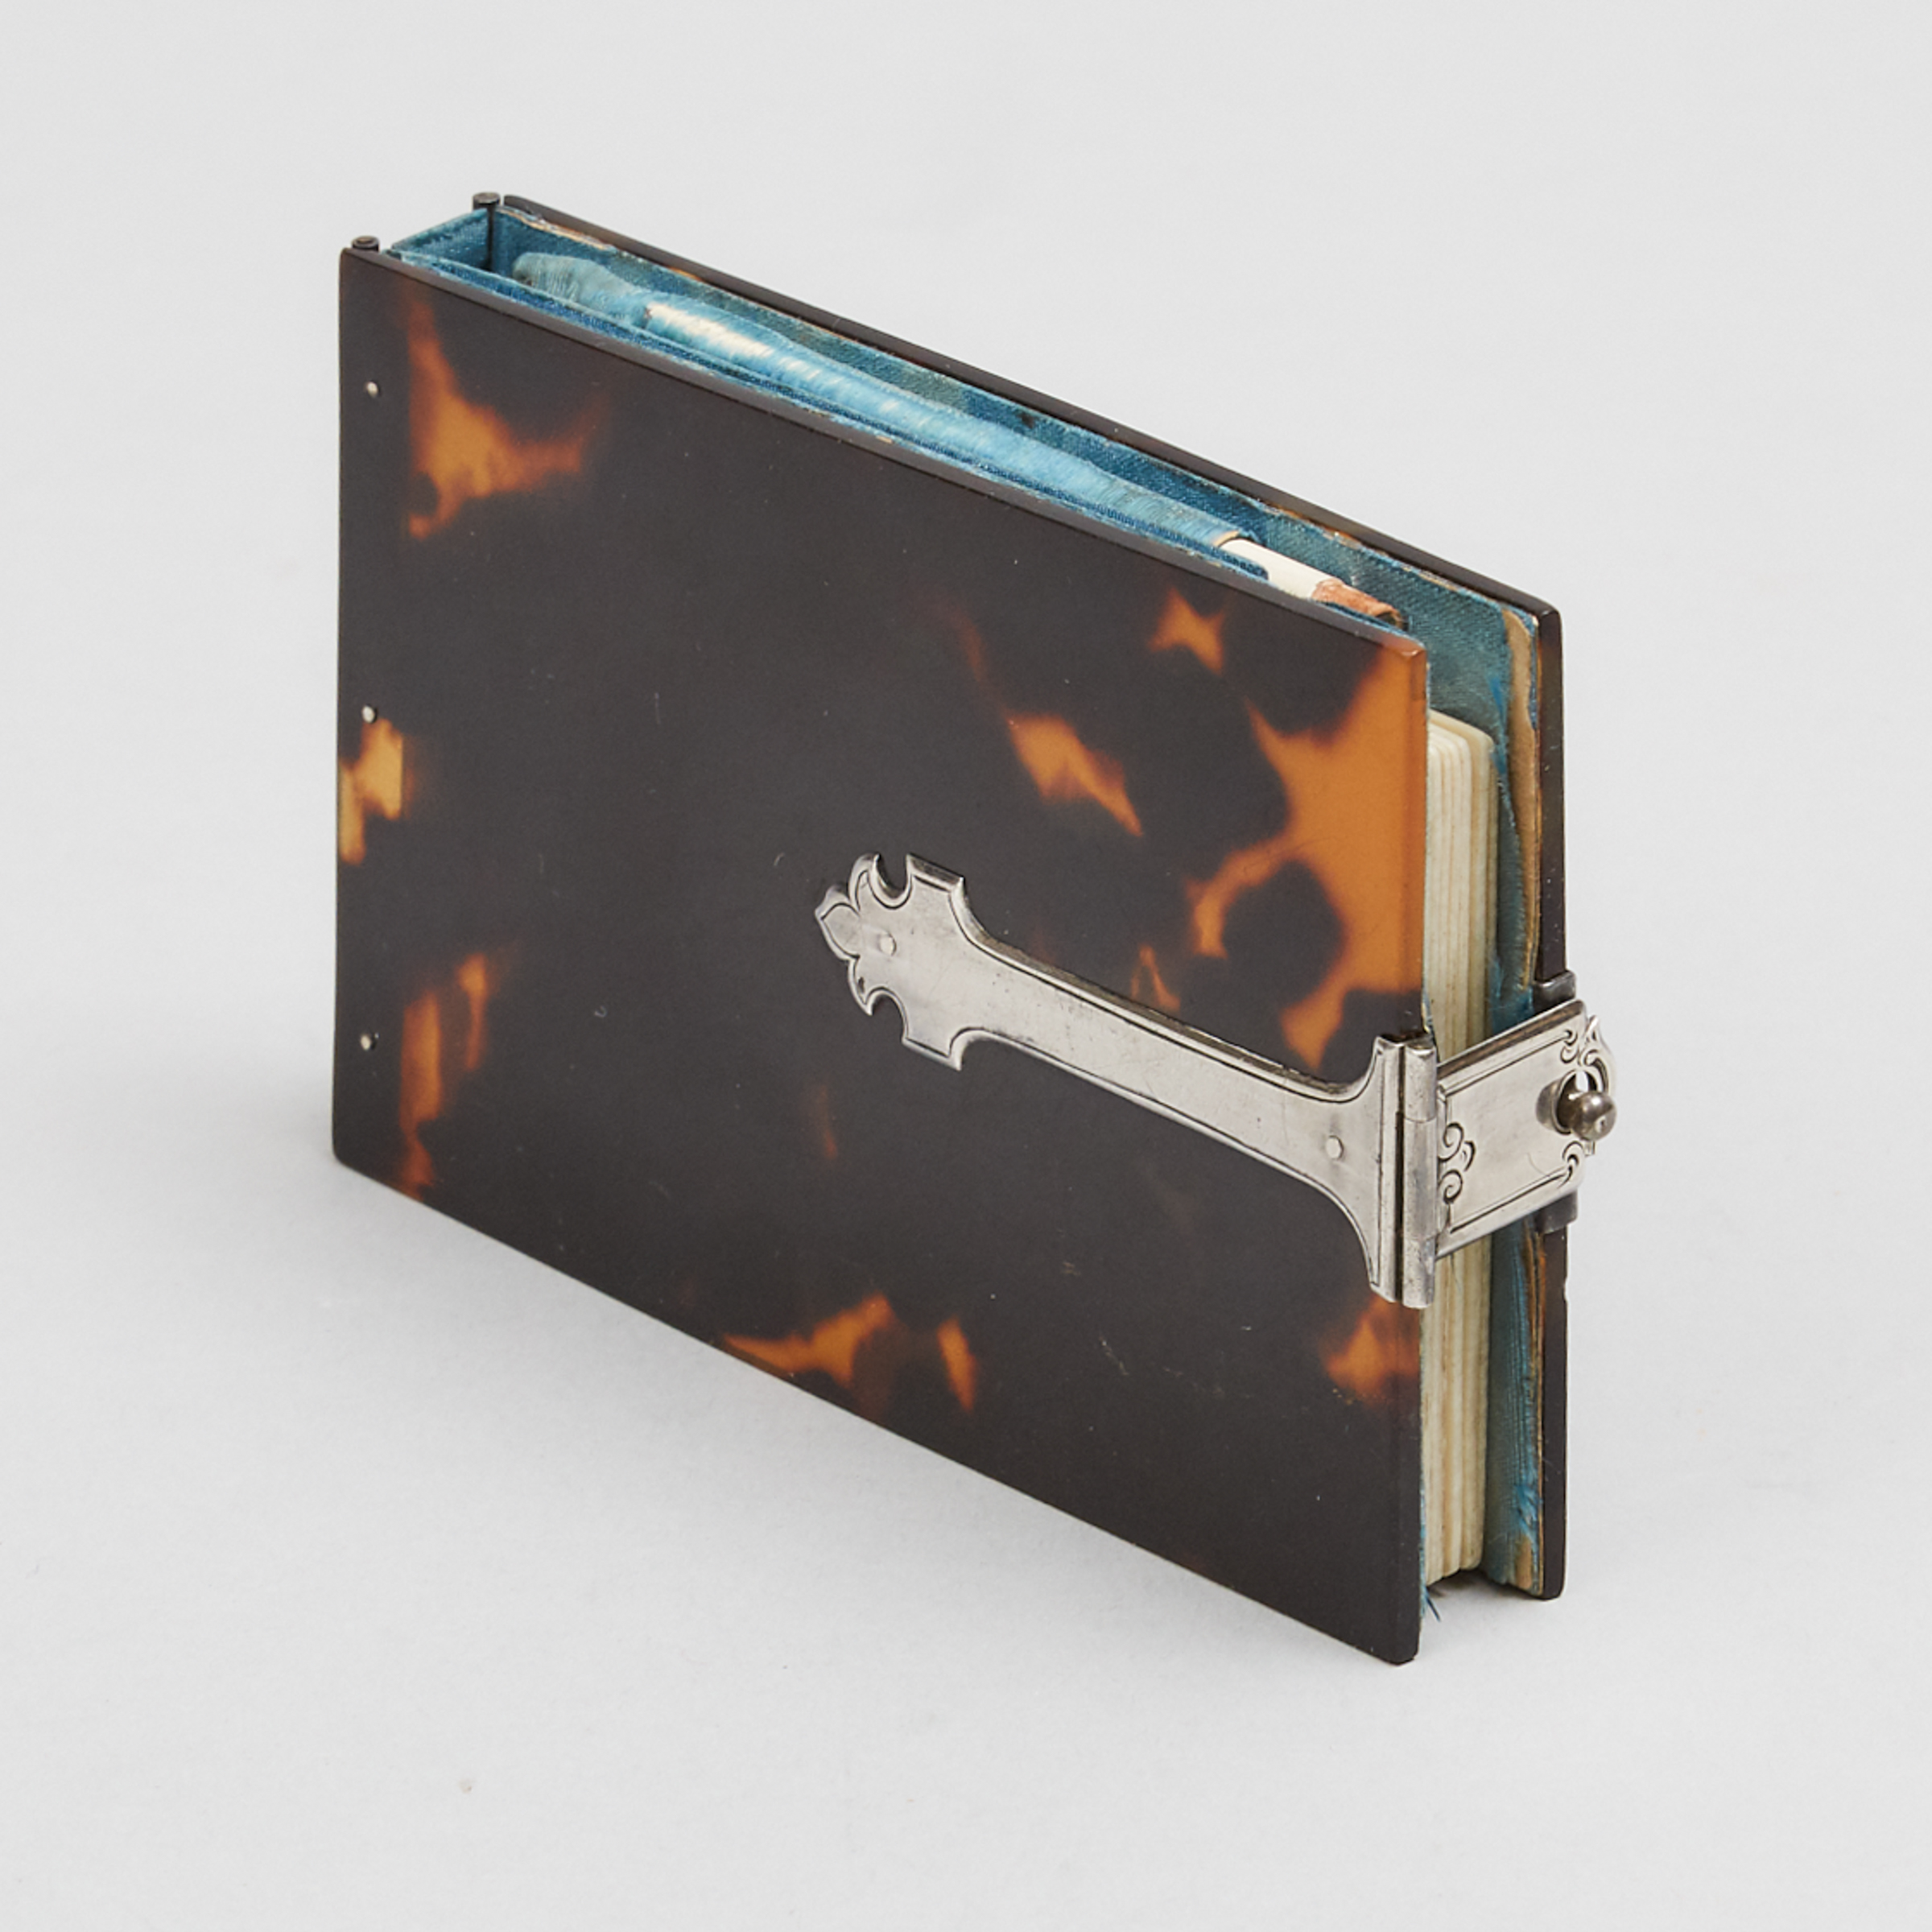 French Silver Mounted Faux Tortoiseshell and Ivory 'Carnet de Bal' Dance Card Book, c.1870